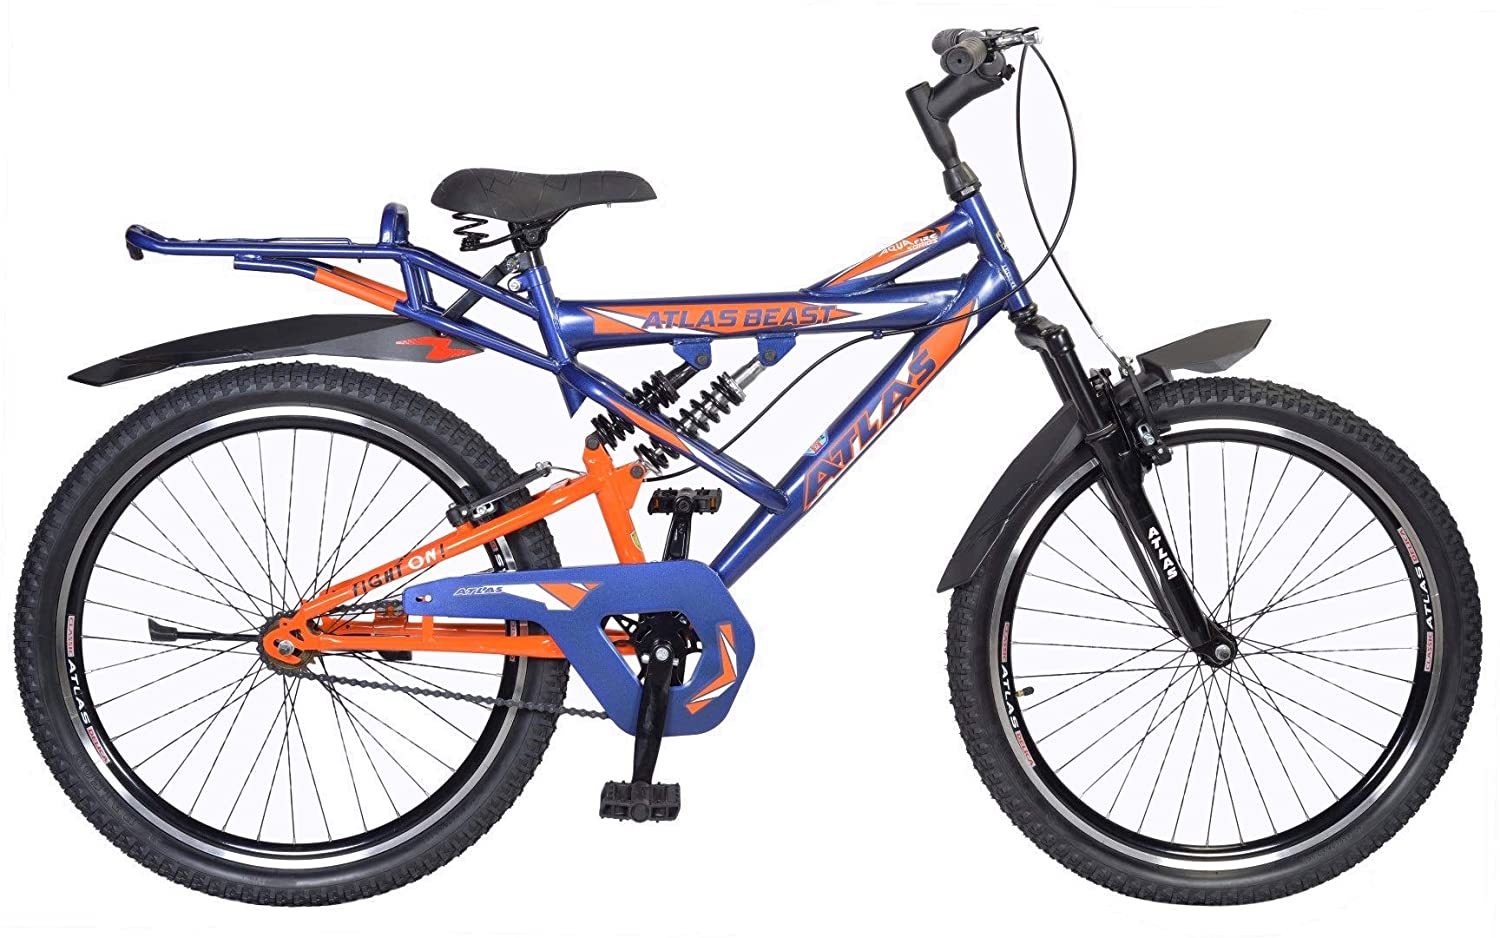 Atlas Beast Triple ShotX 26T Bicycle, Price, Space, Safety and Features